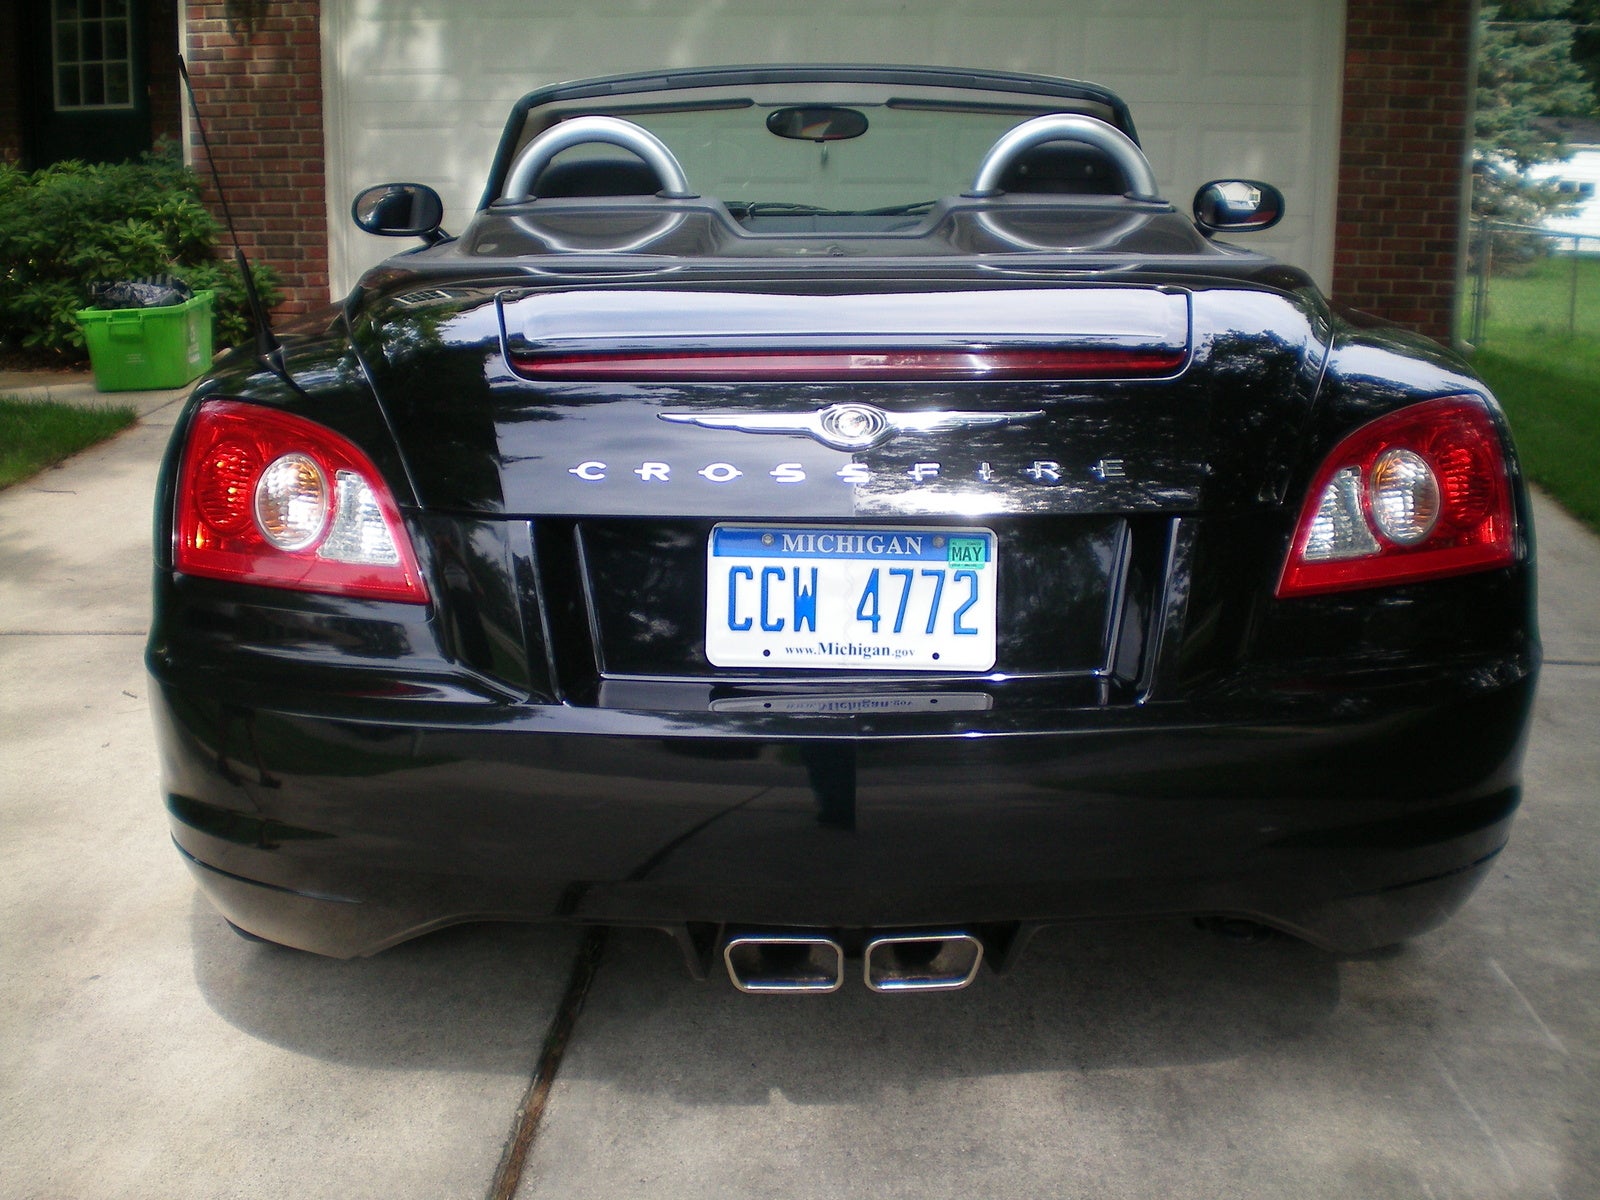 2005 Chrysler crossfire limited specs #5